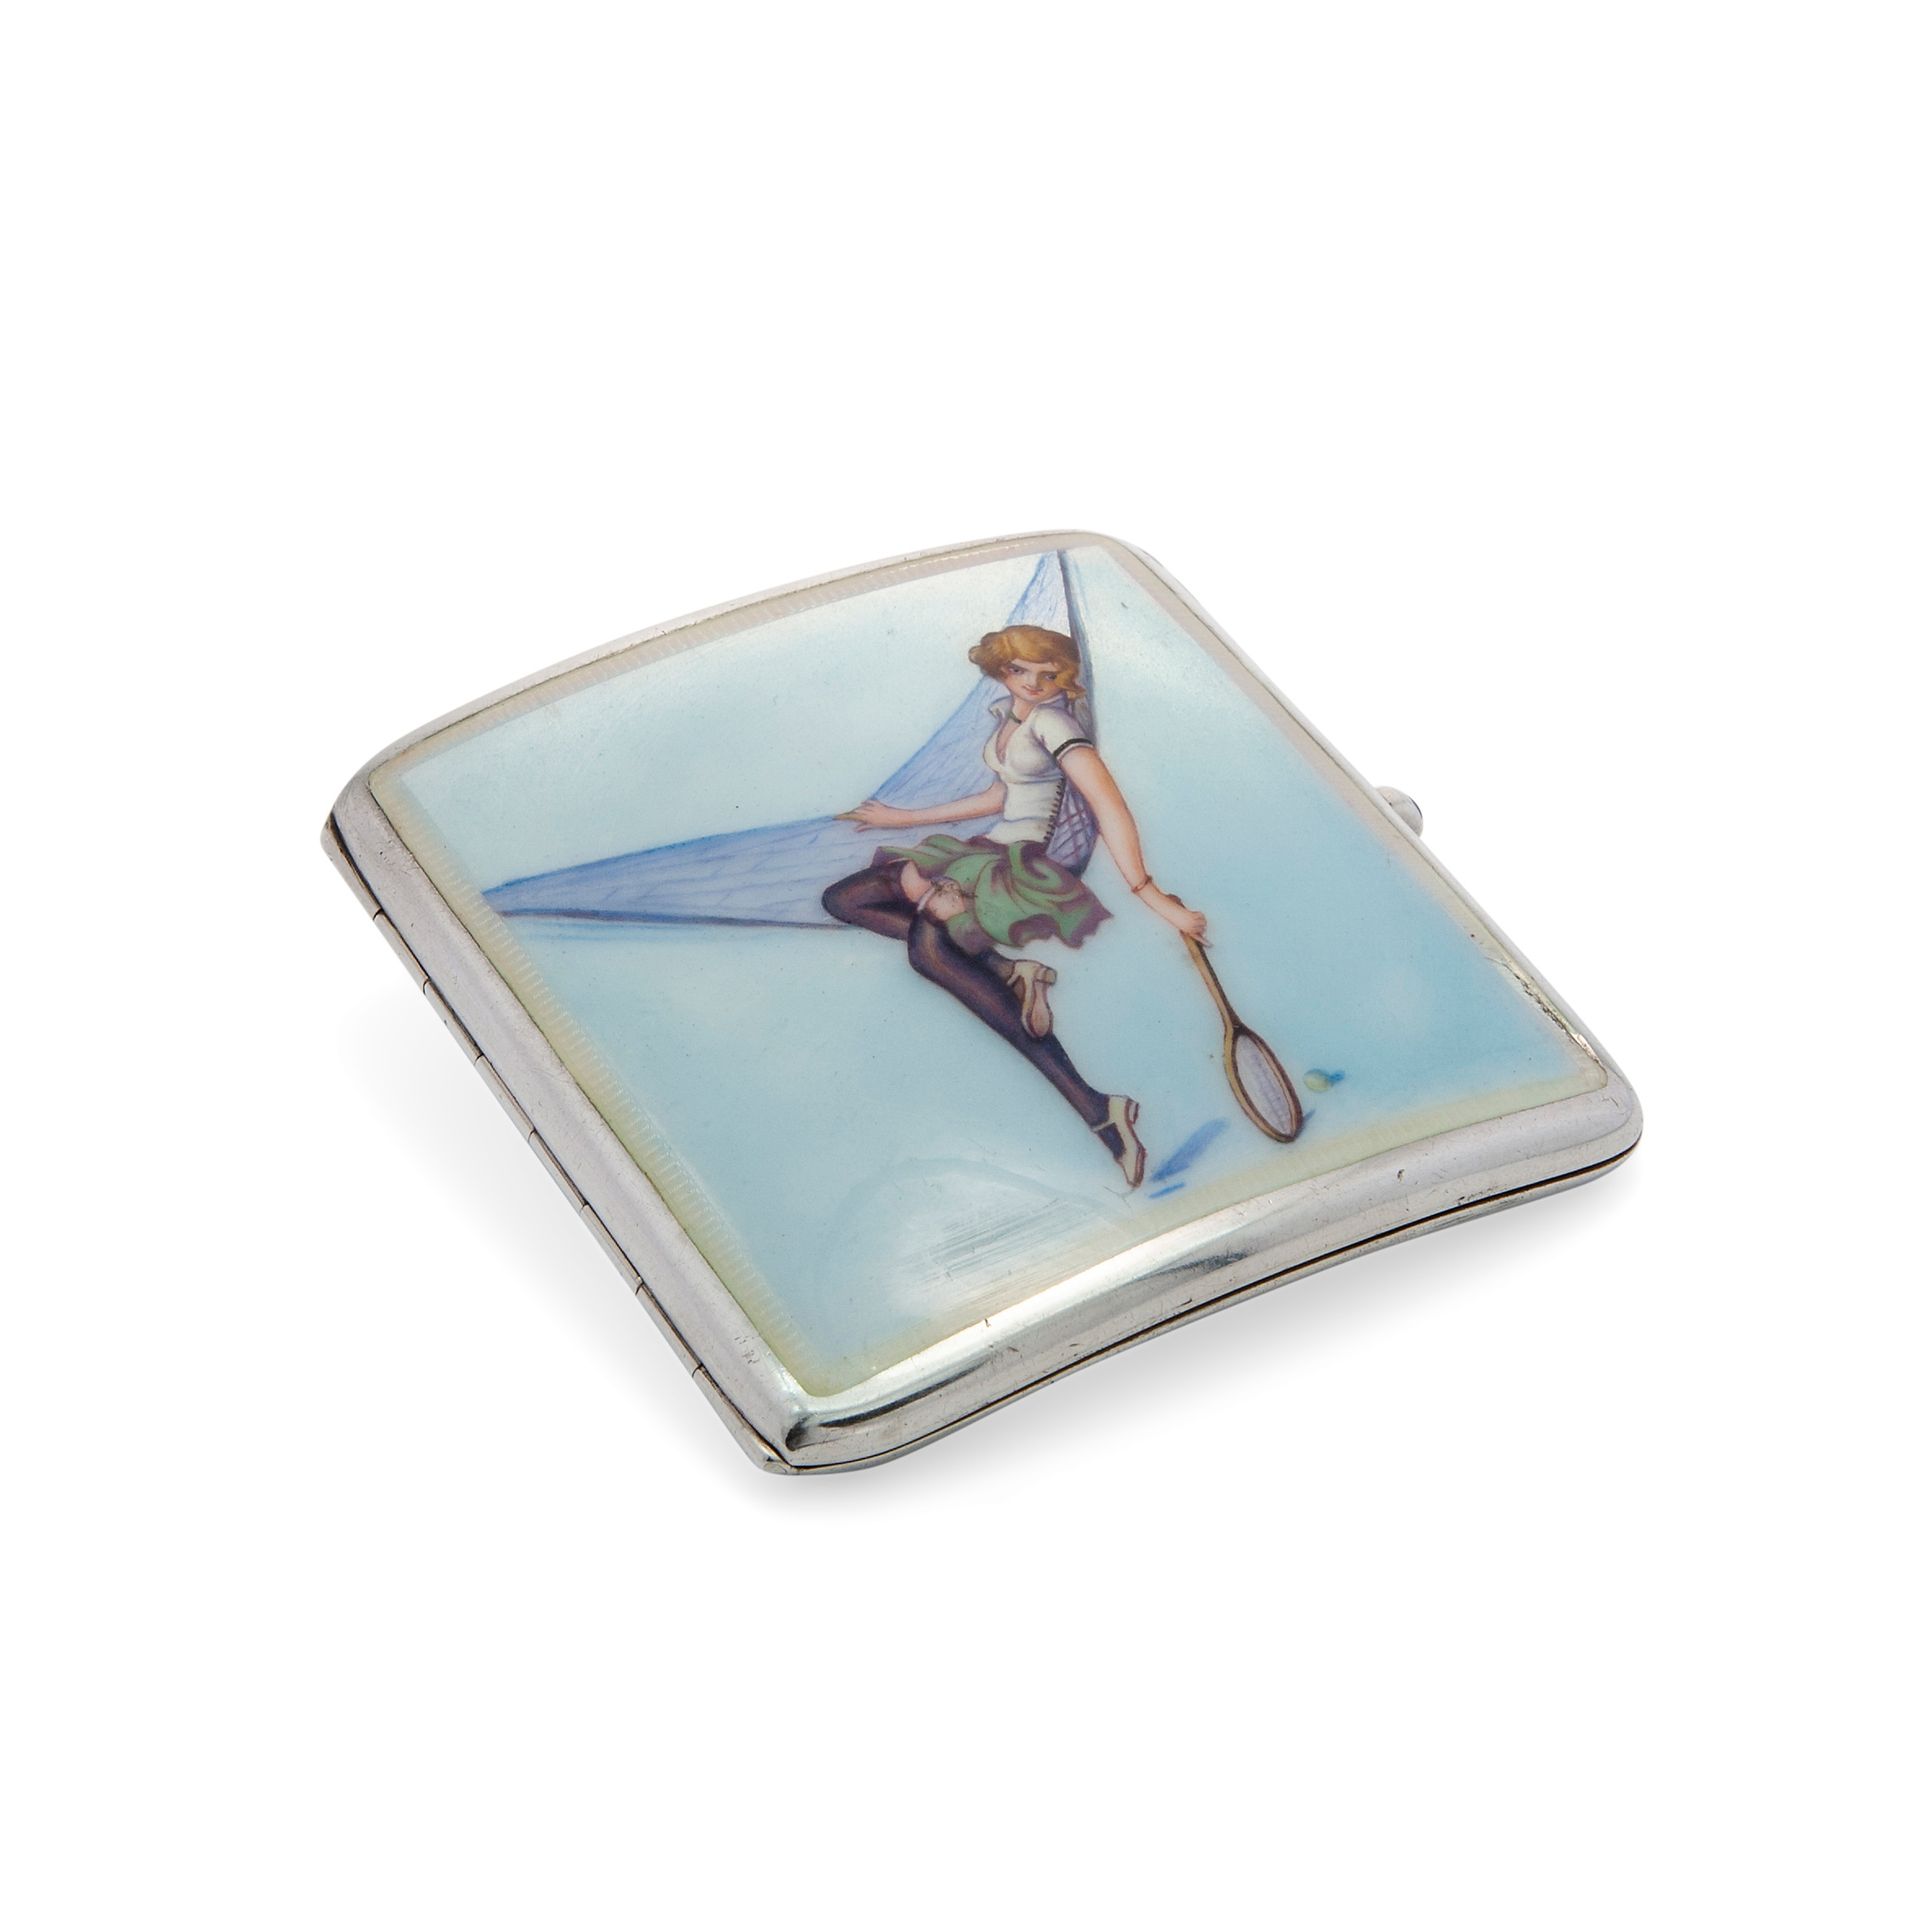 Silver and enamel cigarette case with tennis player, 20th century European manuf&hellip;